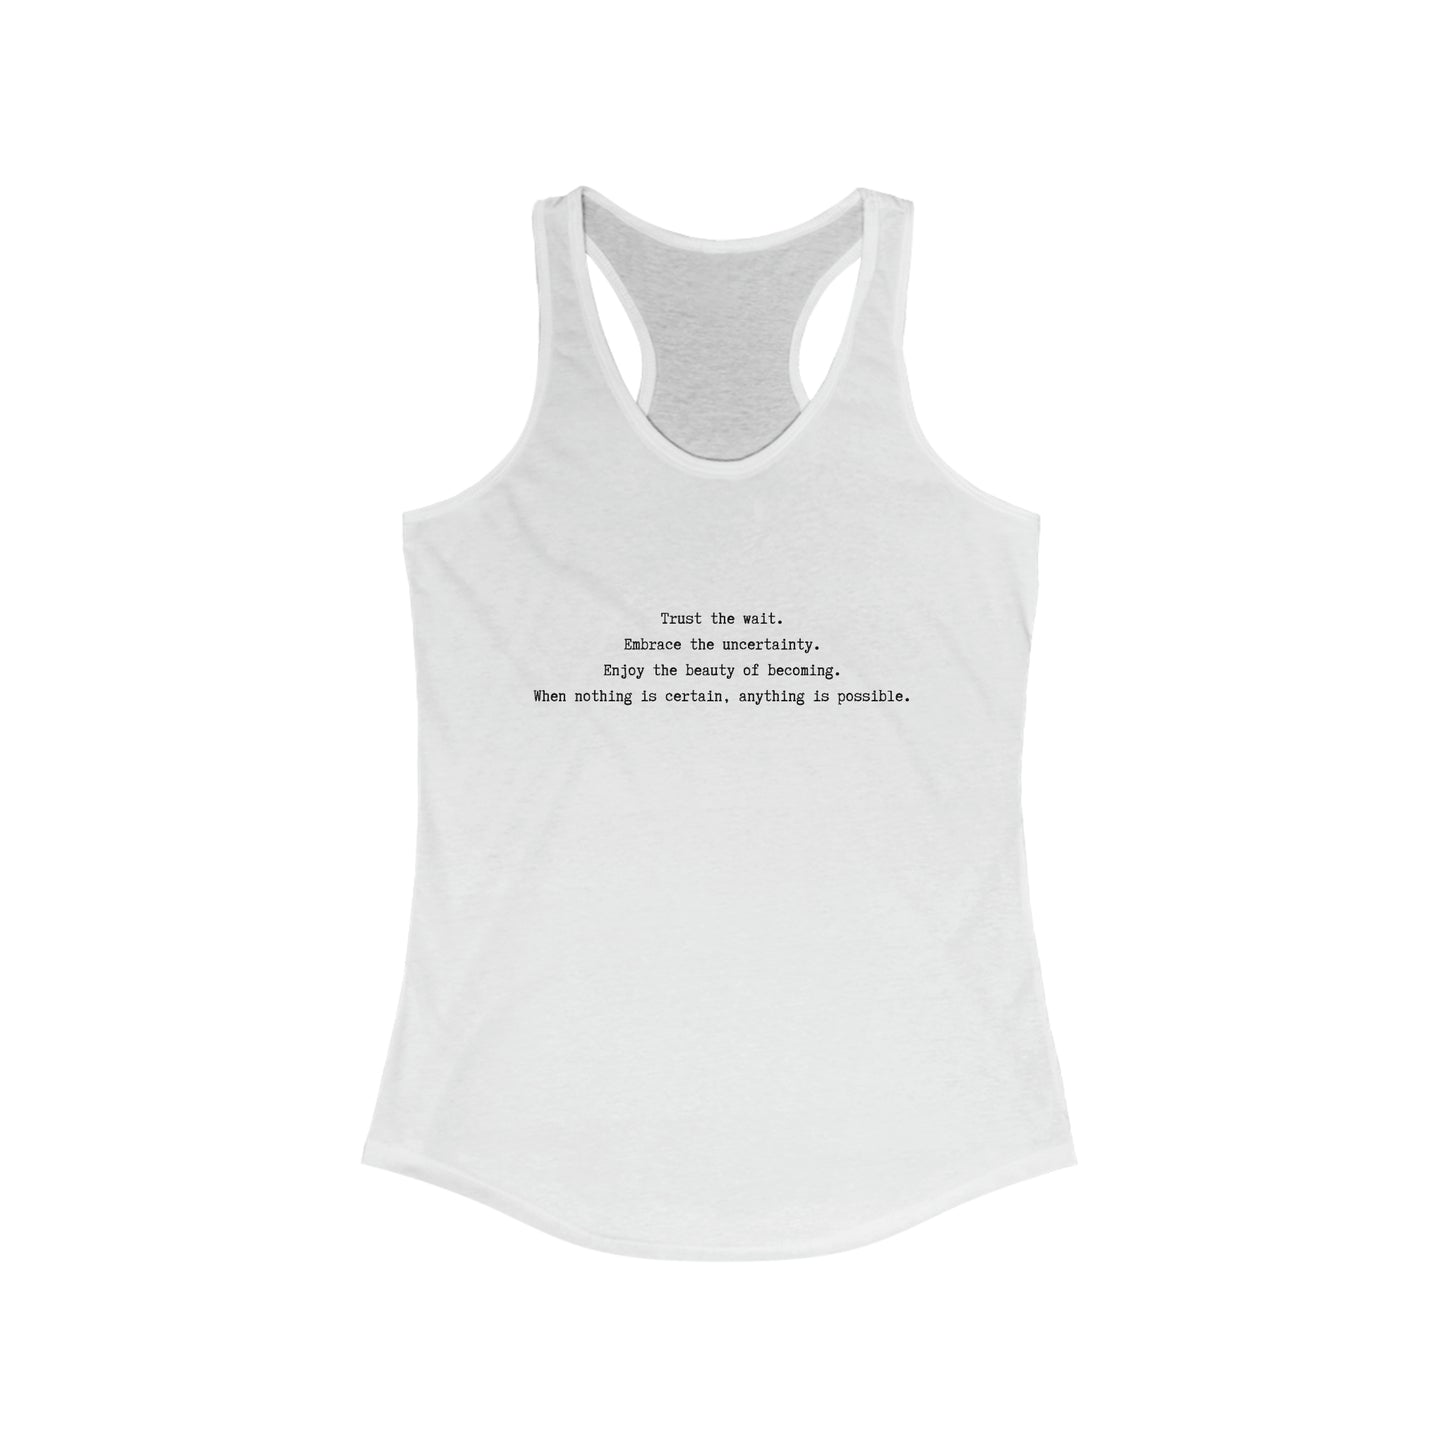 Anything is possible, Women's workout tank top